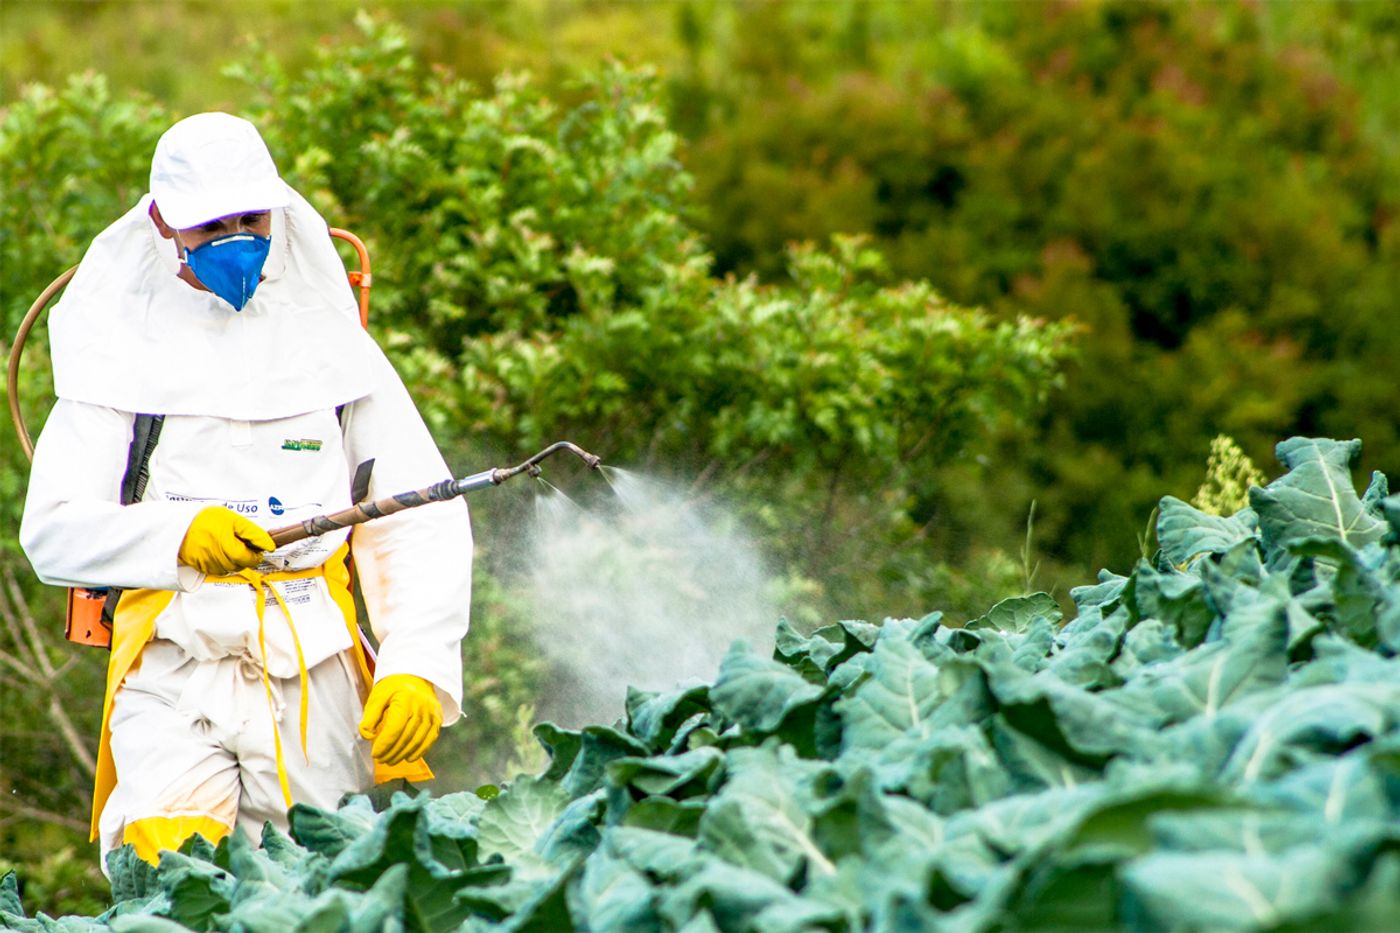 Effects from pesticides on humans are a public health hazard. Photo: Civil Eats